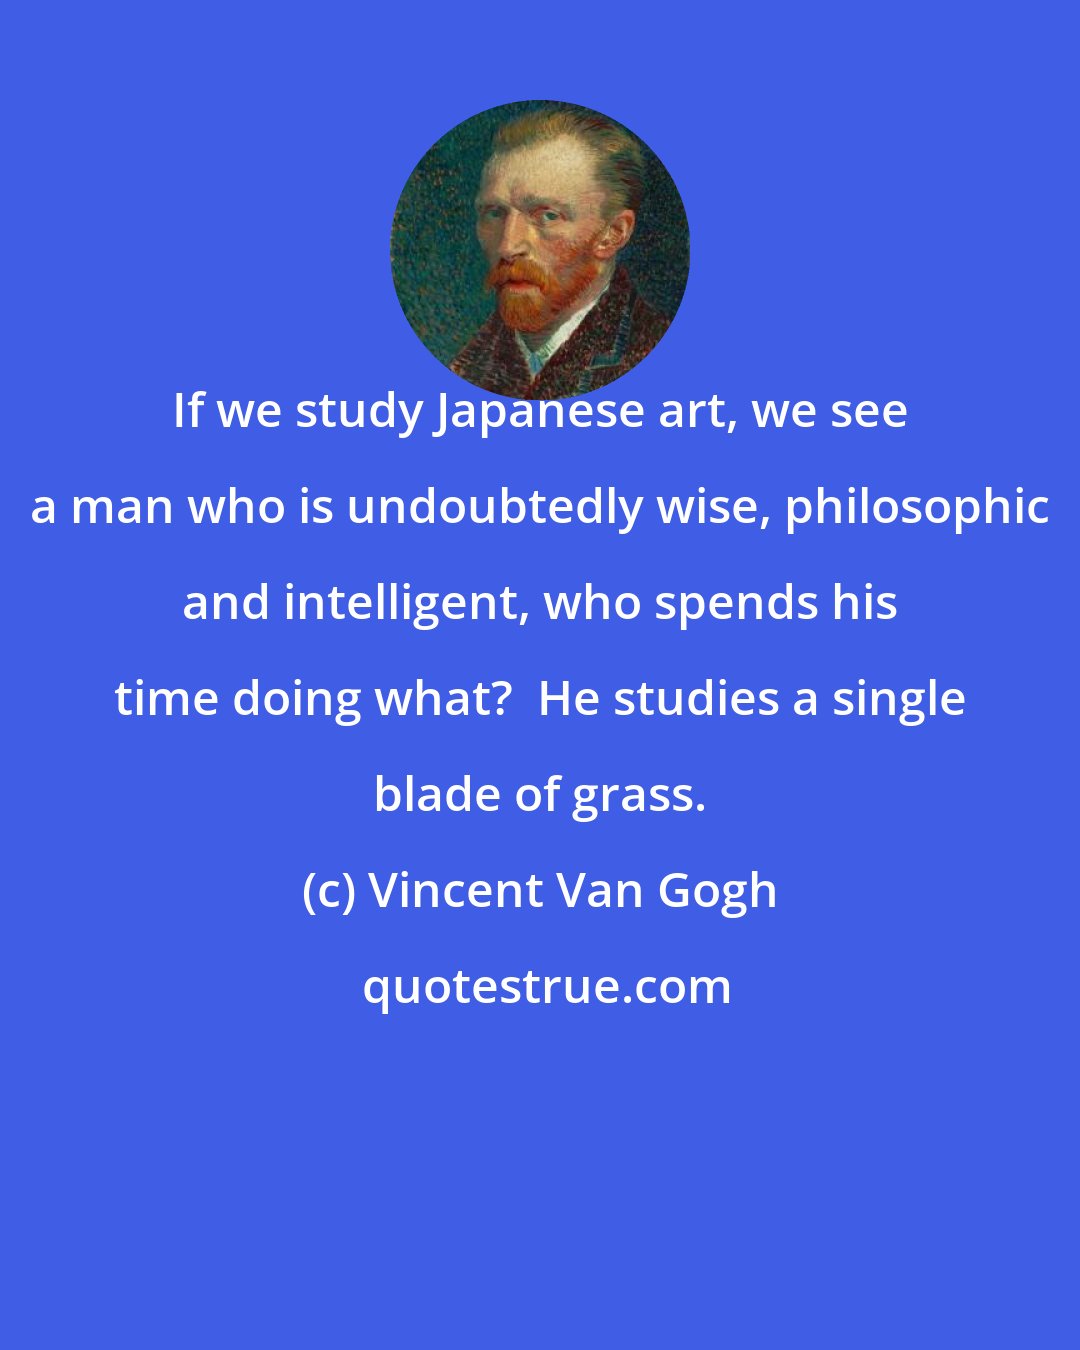 Vincent Van Gogh: If we study Japanese art, we see a man who is undoubtedly wise, philosophic and intelligent, who spends his time doing what?  He studies a single blade of grass.